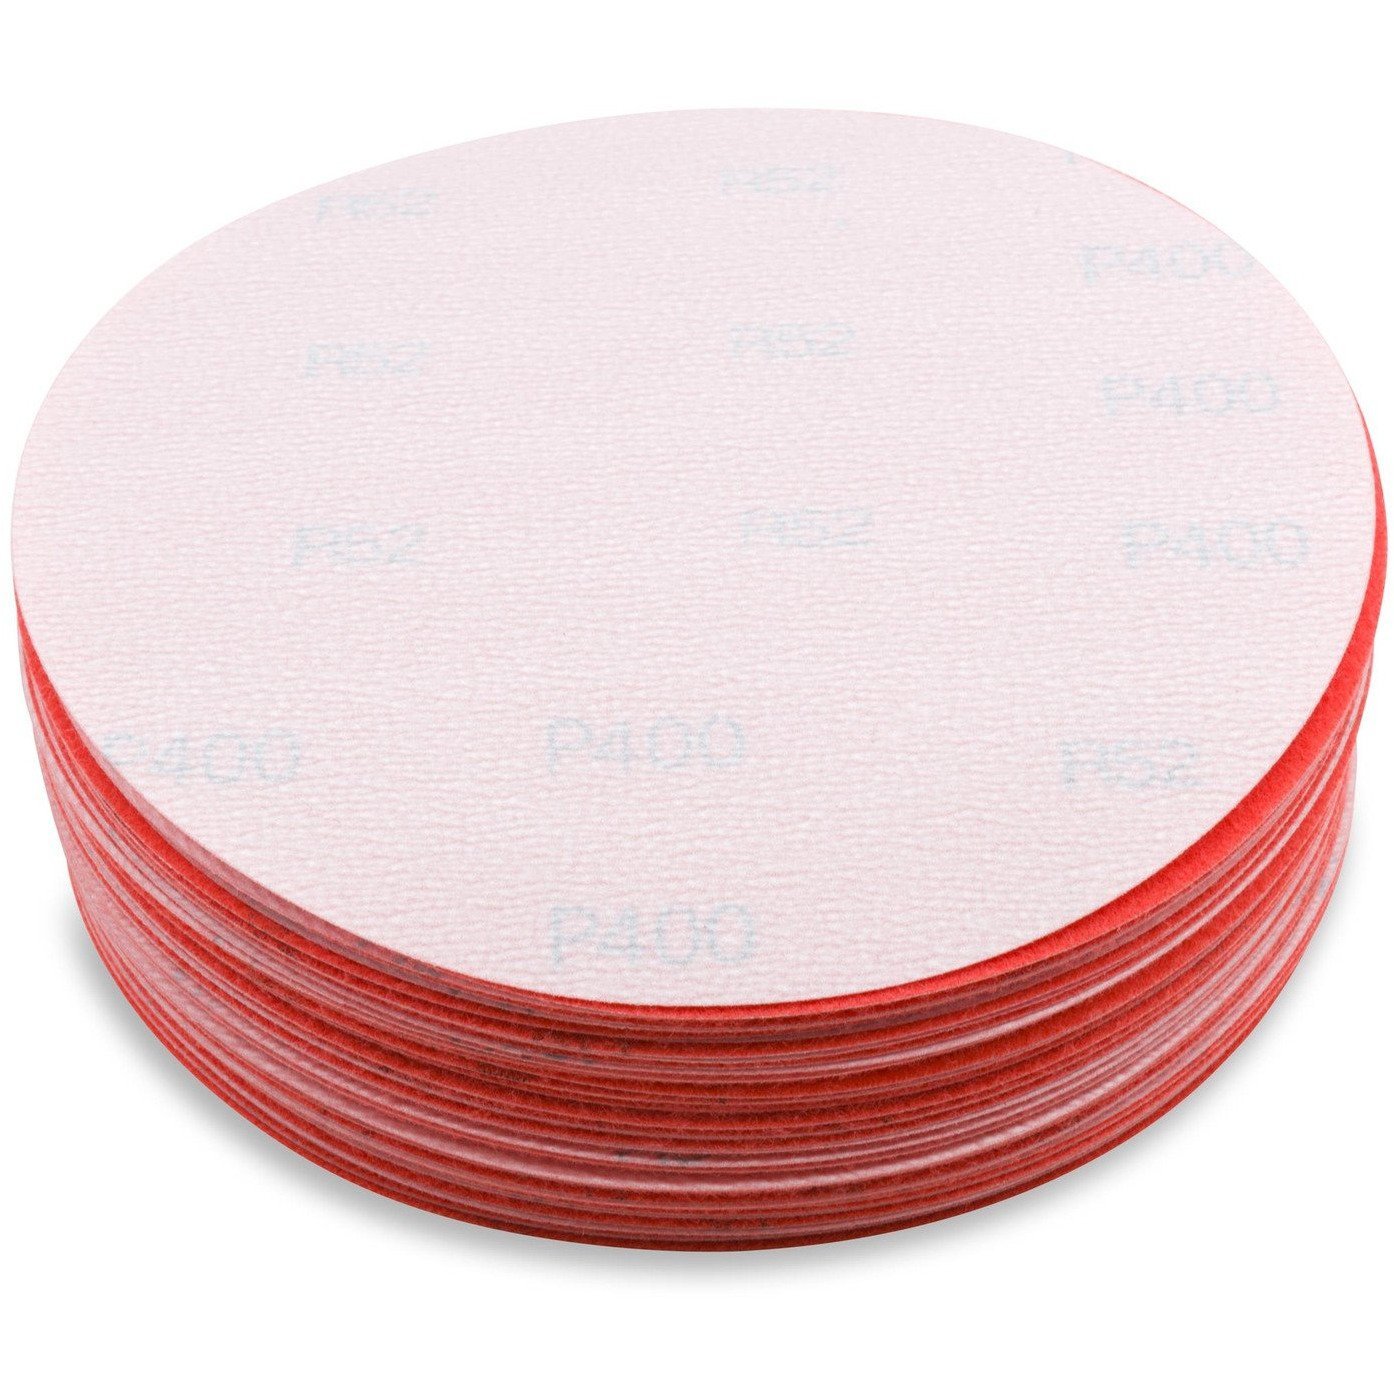 5 Inch Hook and Loop Orange Wet / Dry Auto Body Film Sanding Discs, 50 Pack - Red Label Abrasives